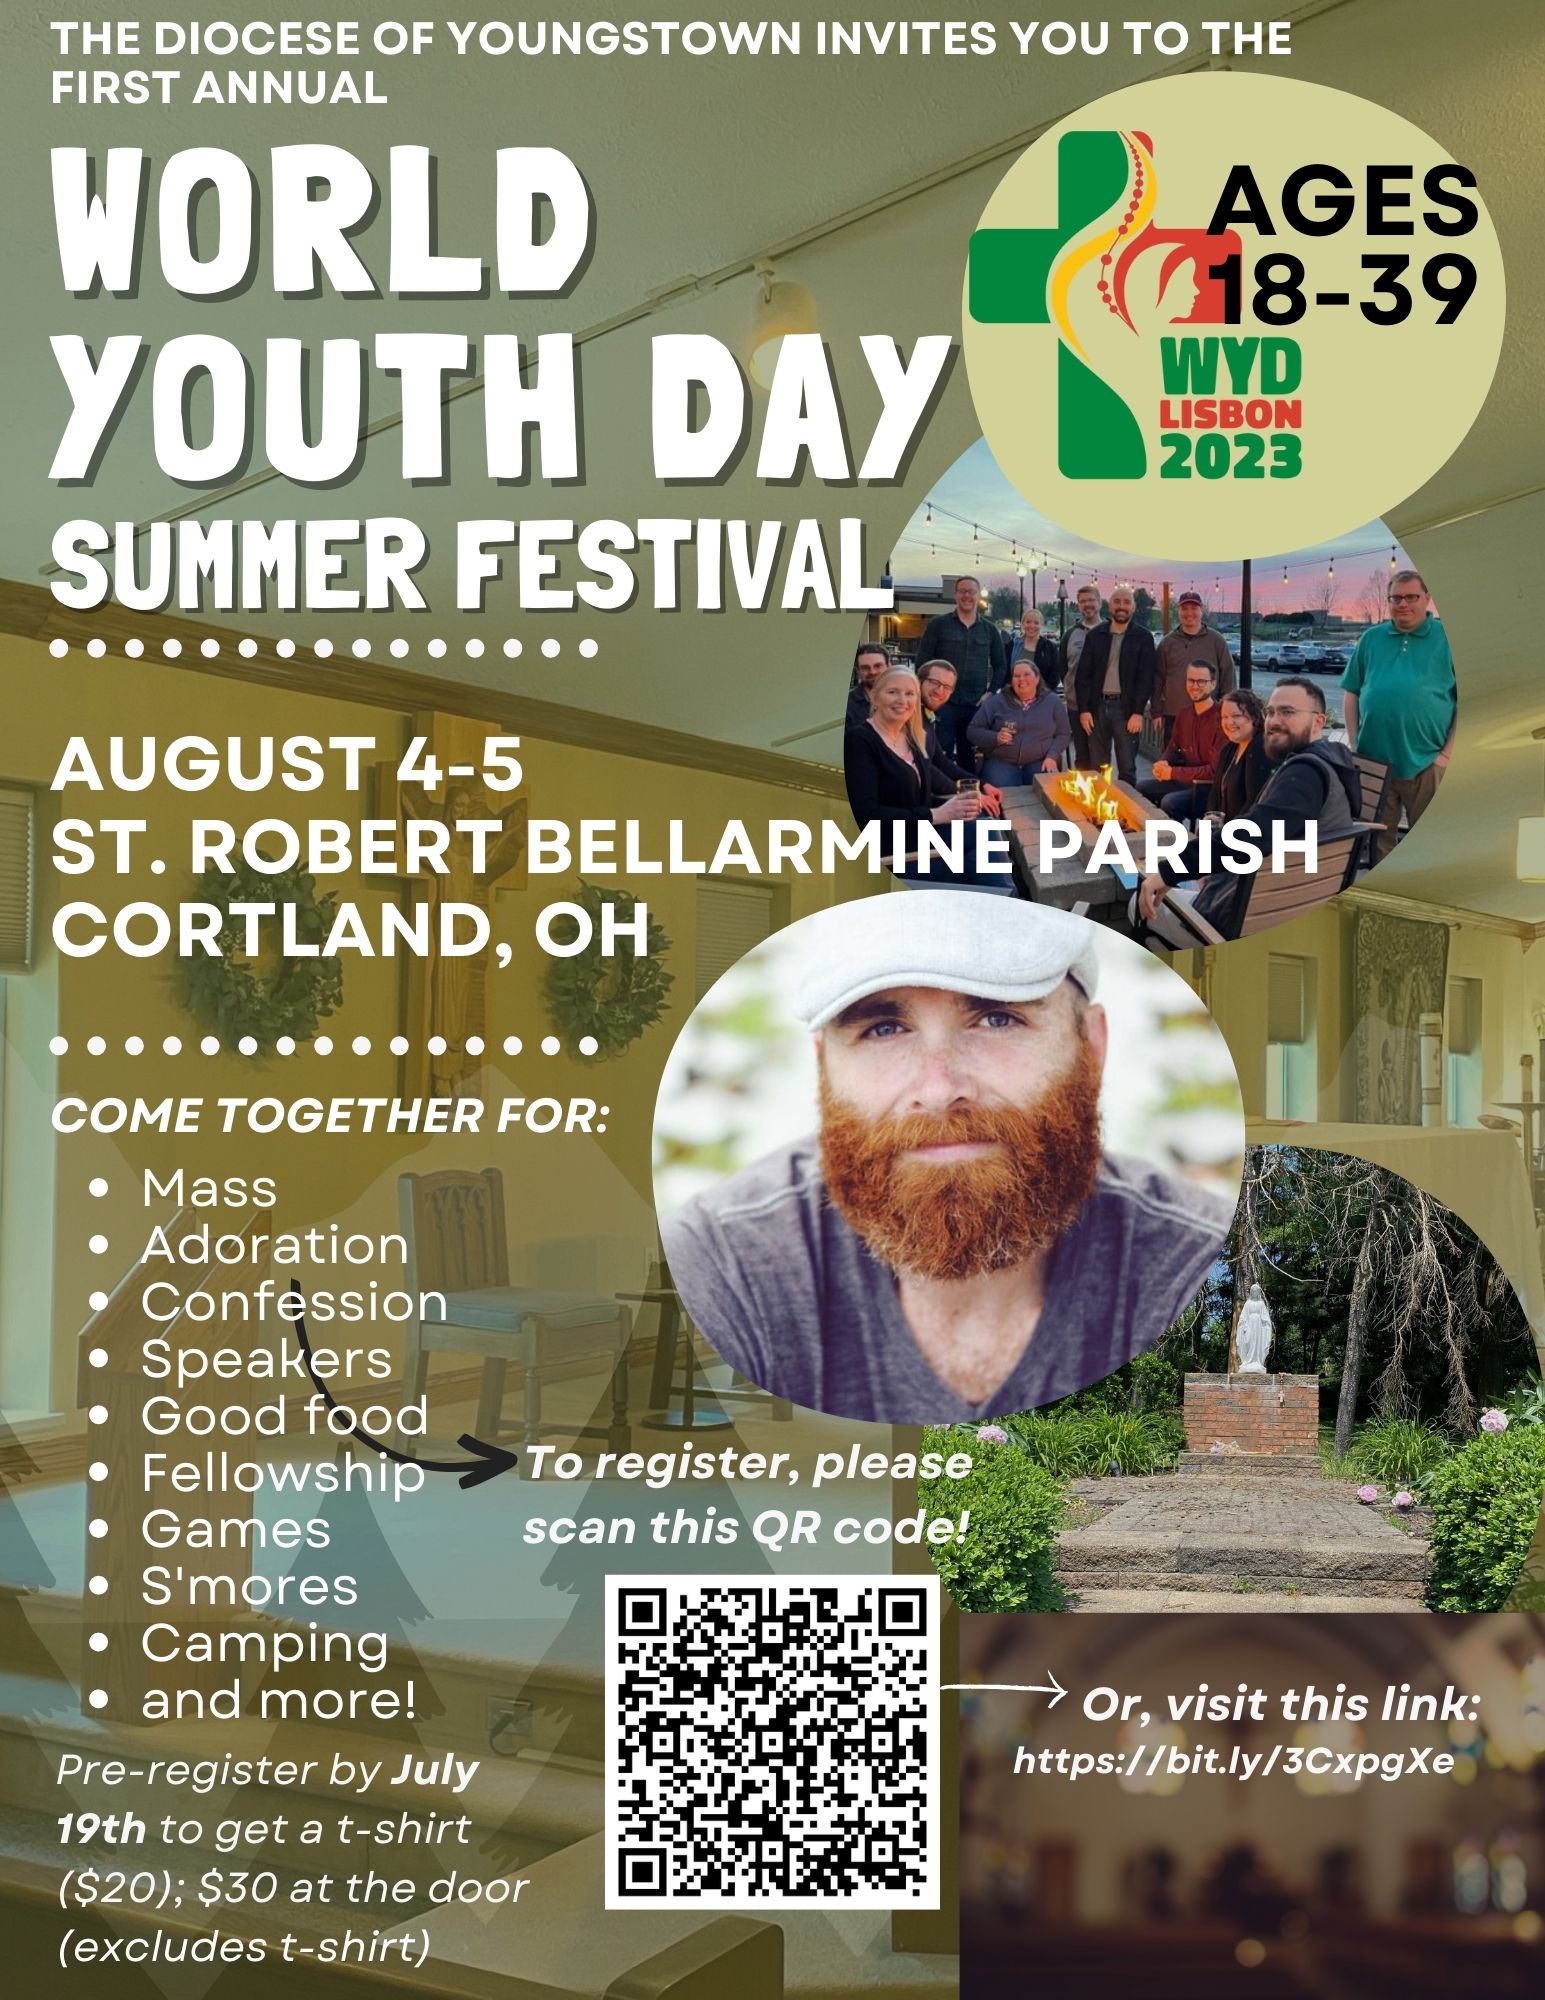 World Youth Day Summer Festival, August 4 to 5, 2023. For more information contact Arthur Bodenschatz at abodenschatz@youngstowndiocese.org